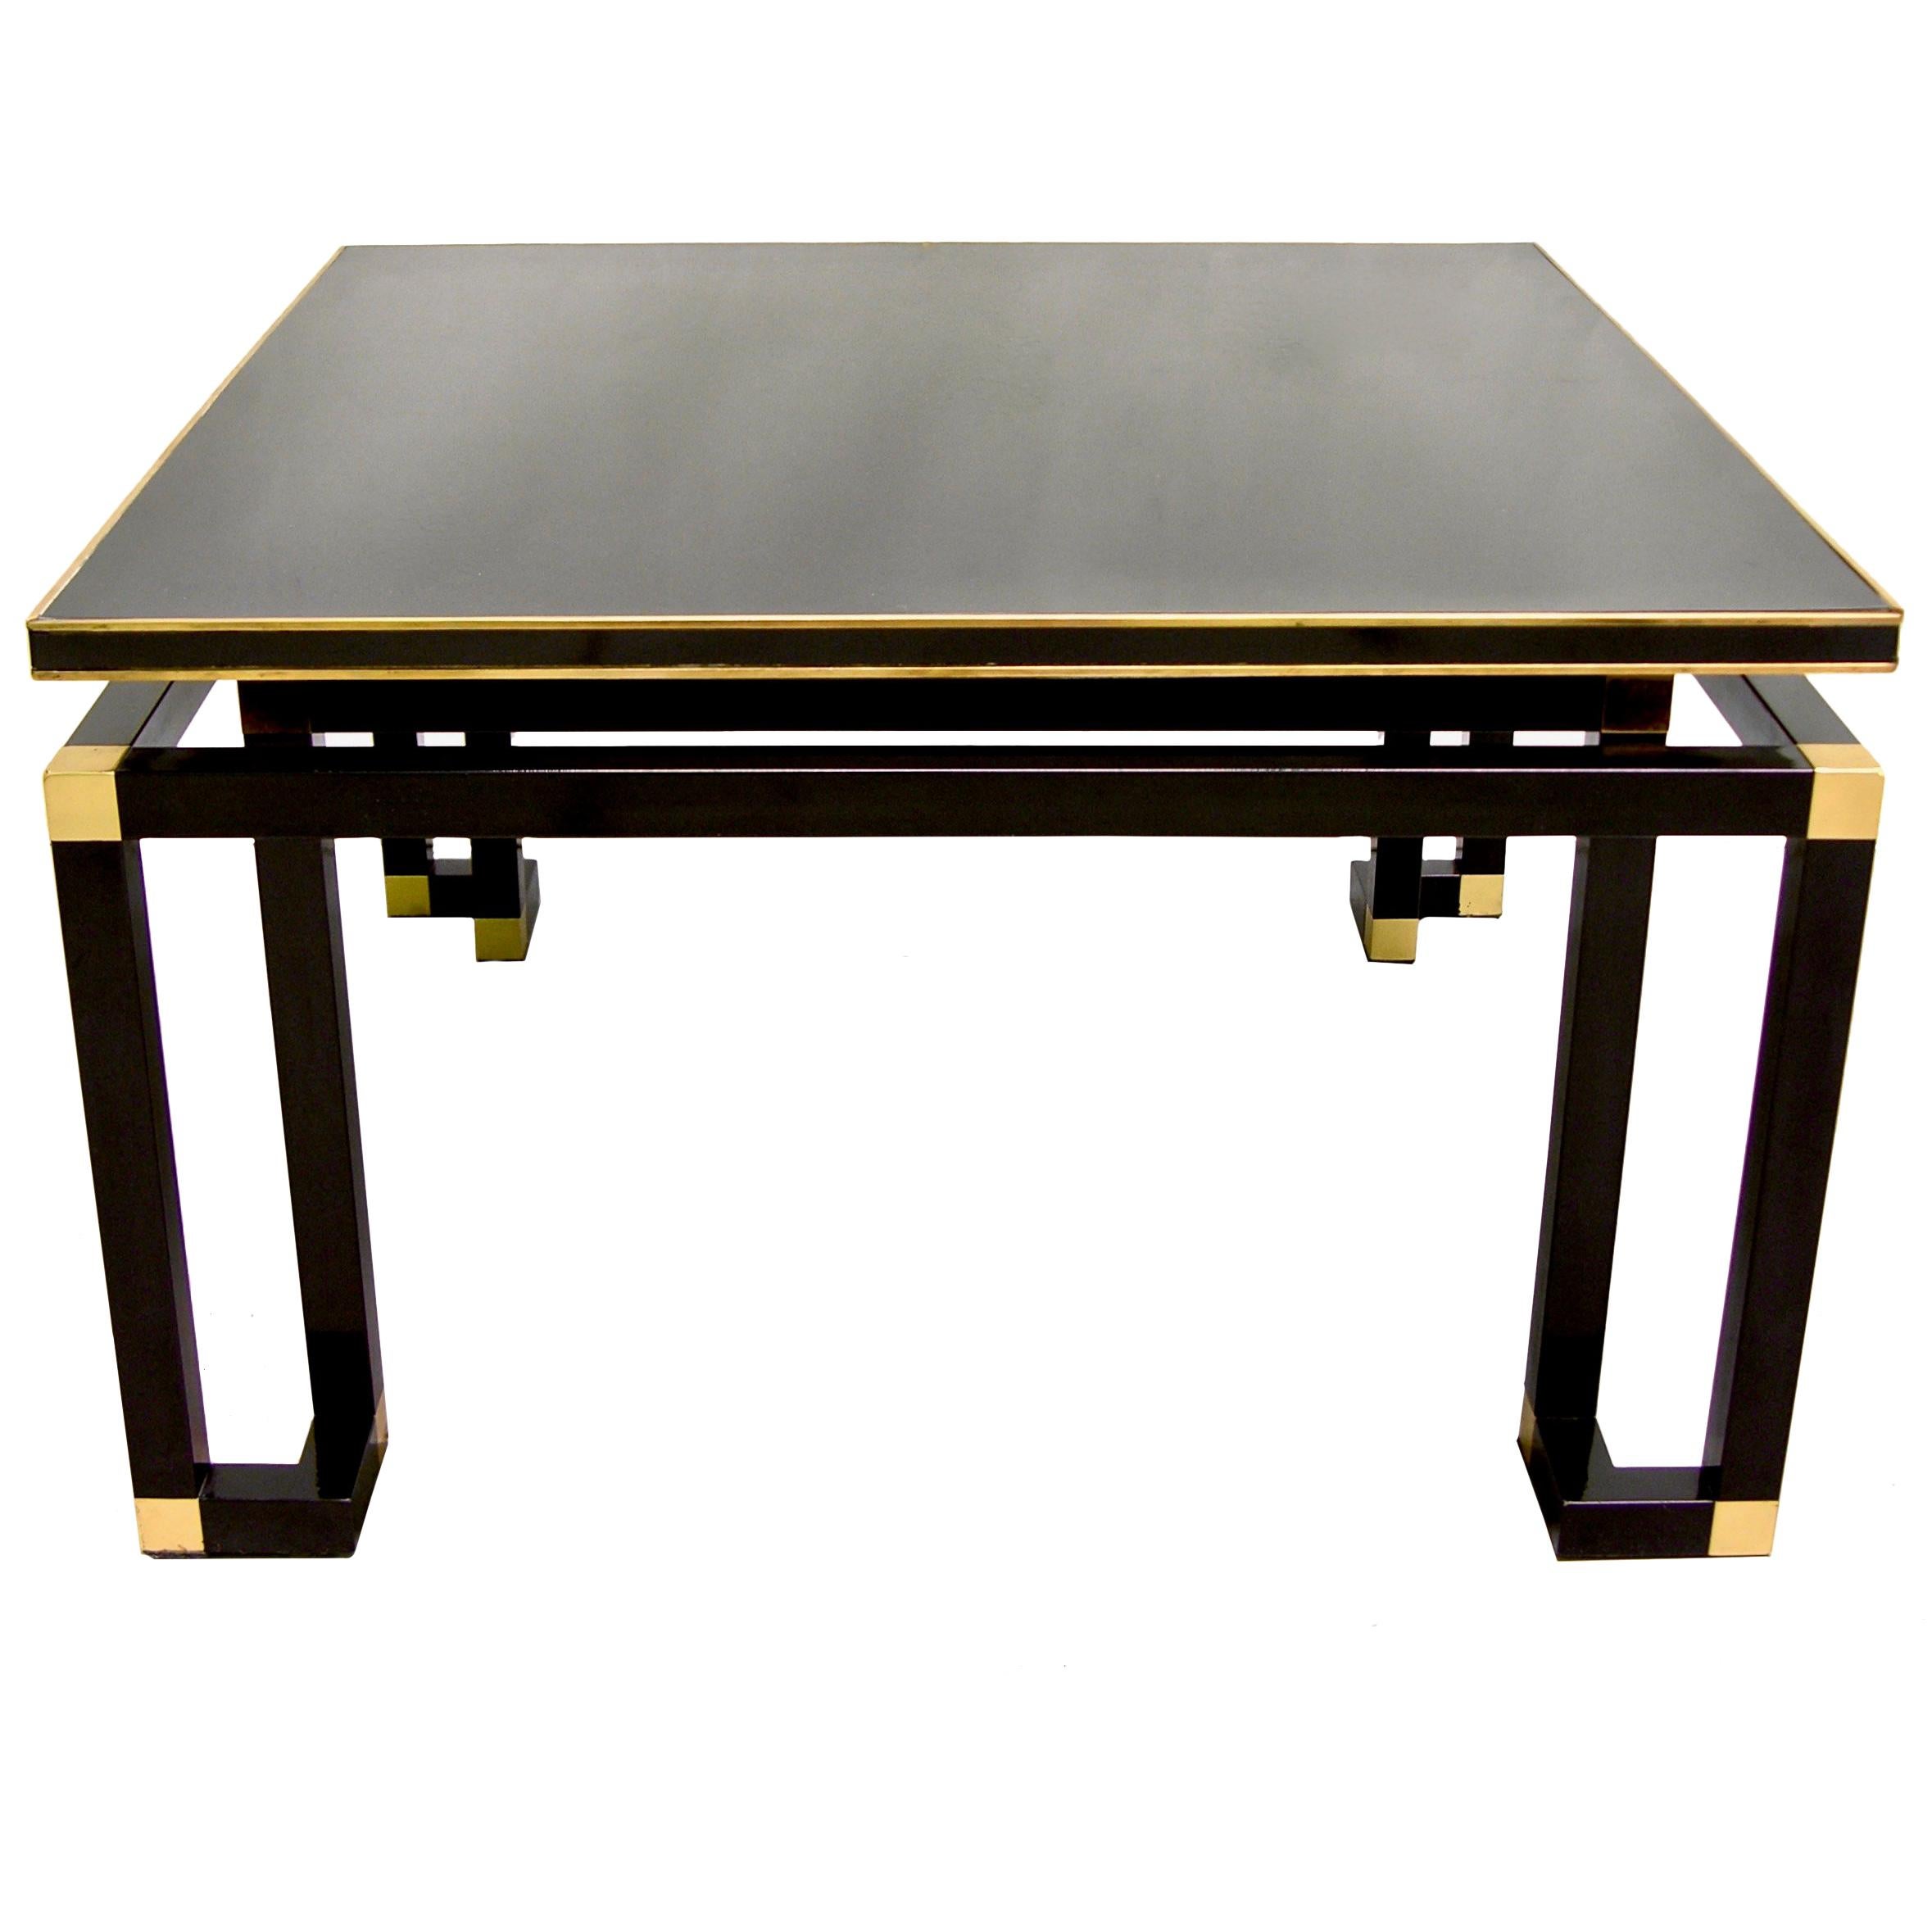 Studio A 1970s Italian Vintage Black Lacquered Wood and Brass Coffee/Sofa Table